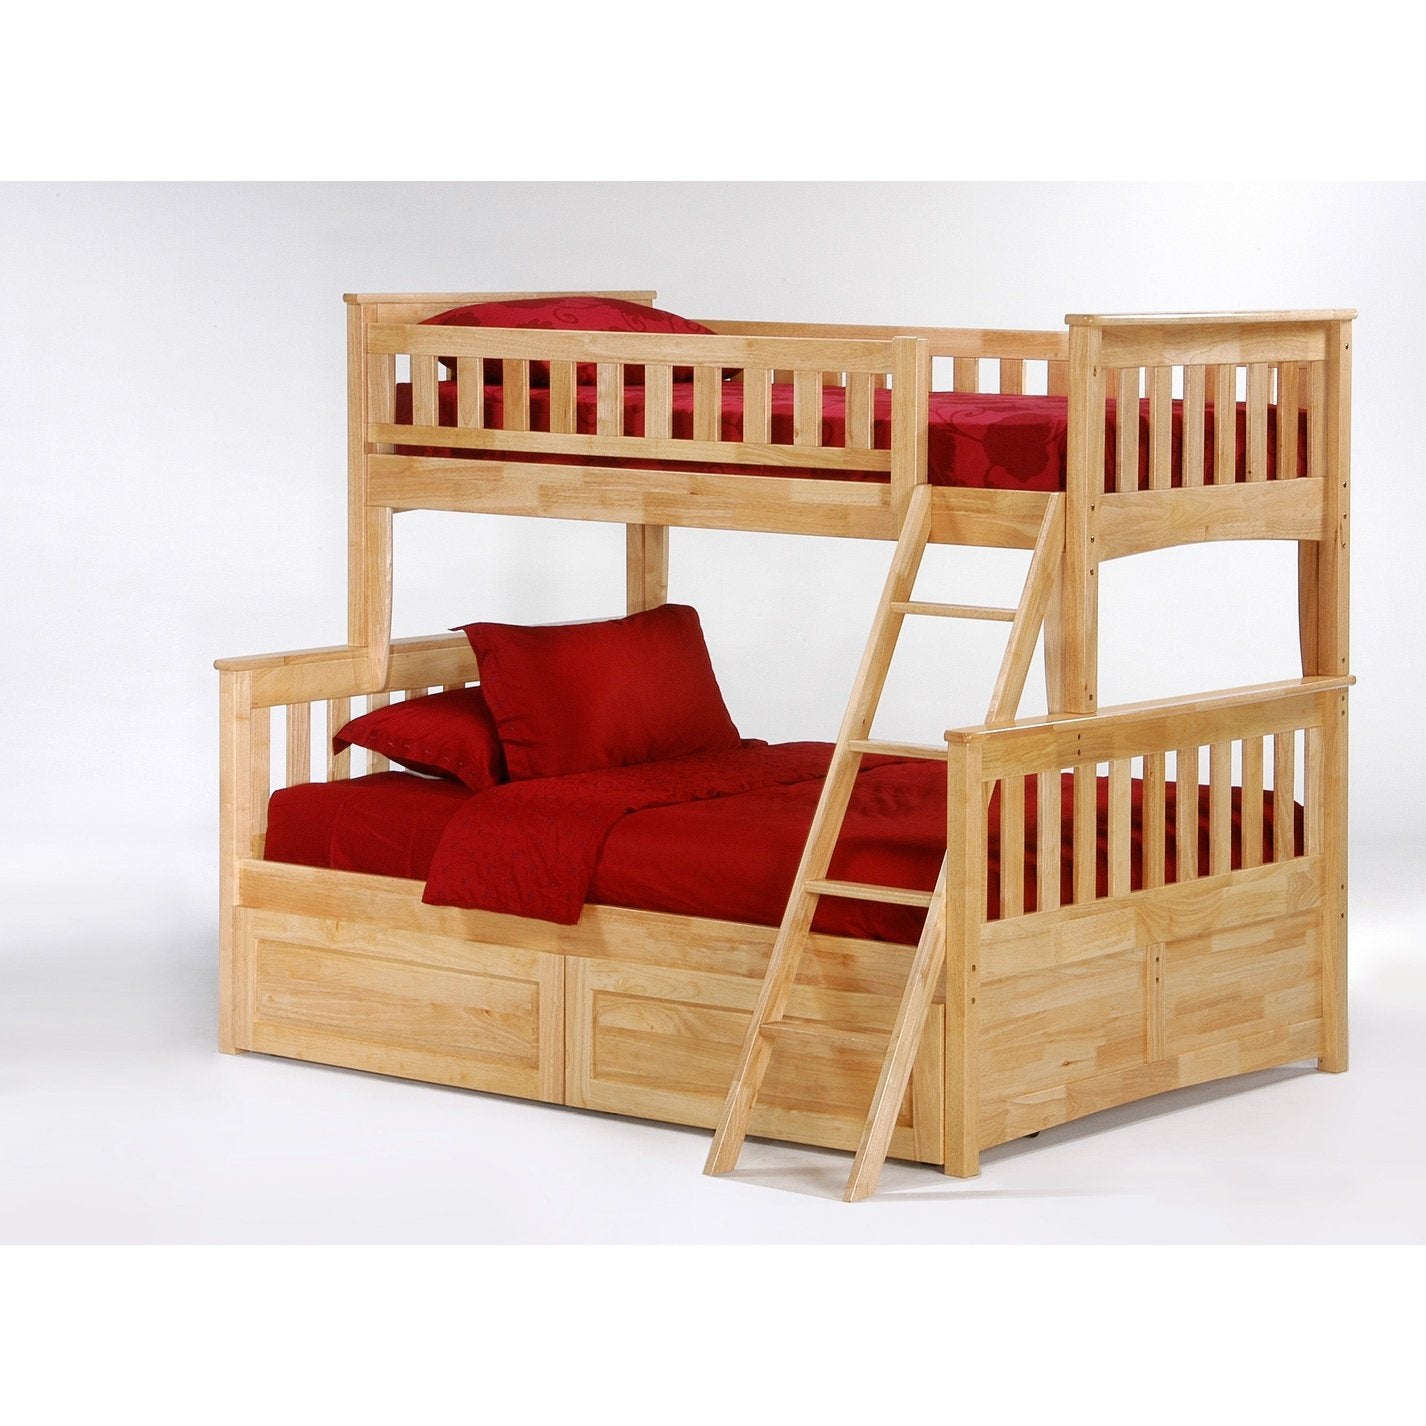 Night and Day Furniture Spices Ginger Twin/Full Bunk Bed - New Star Living